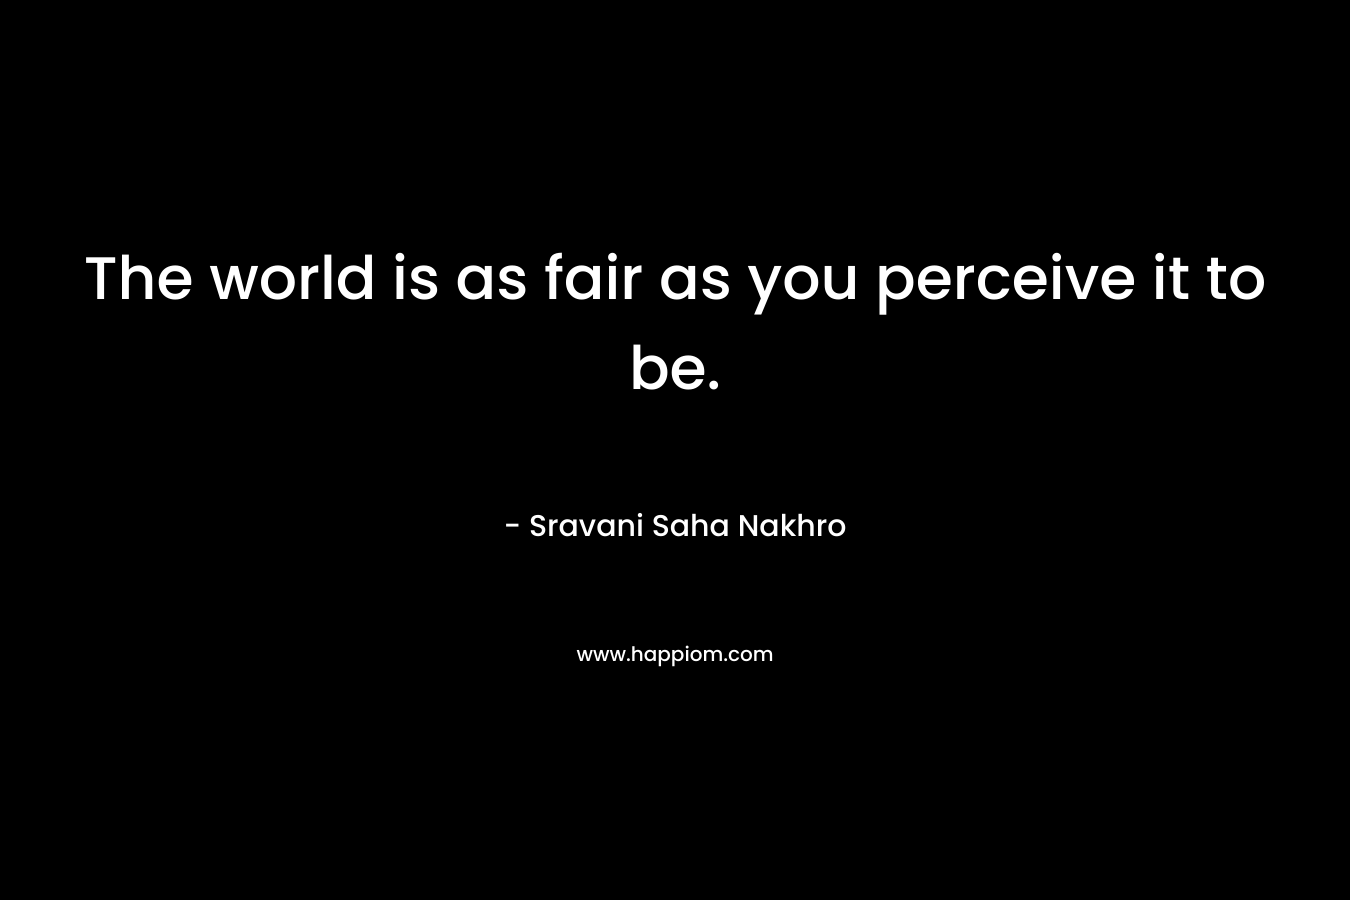 The world is as fair as you perceive it to be.